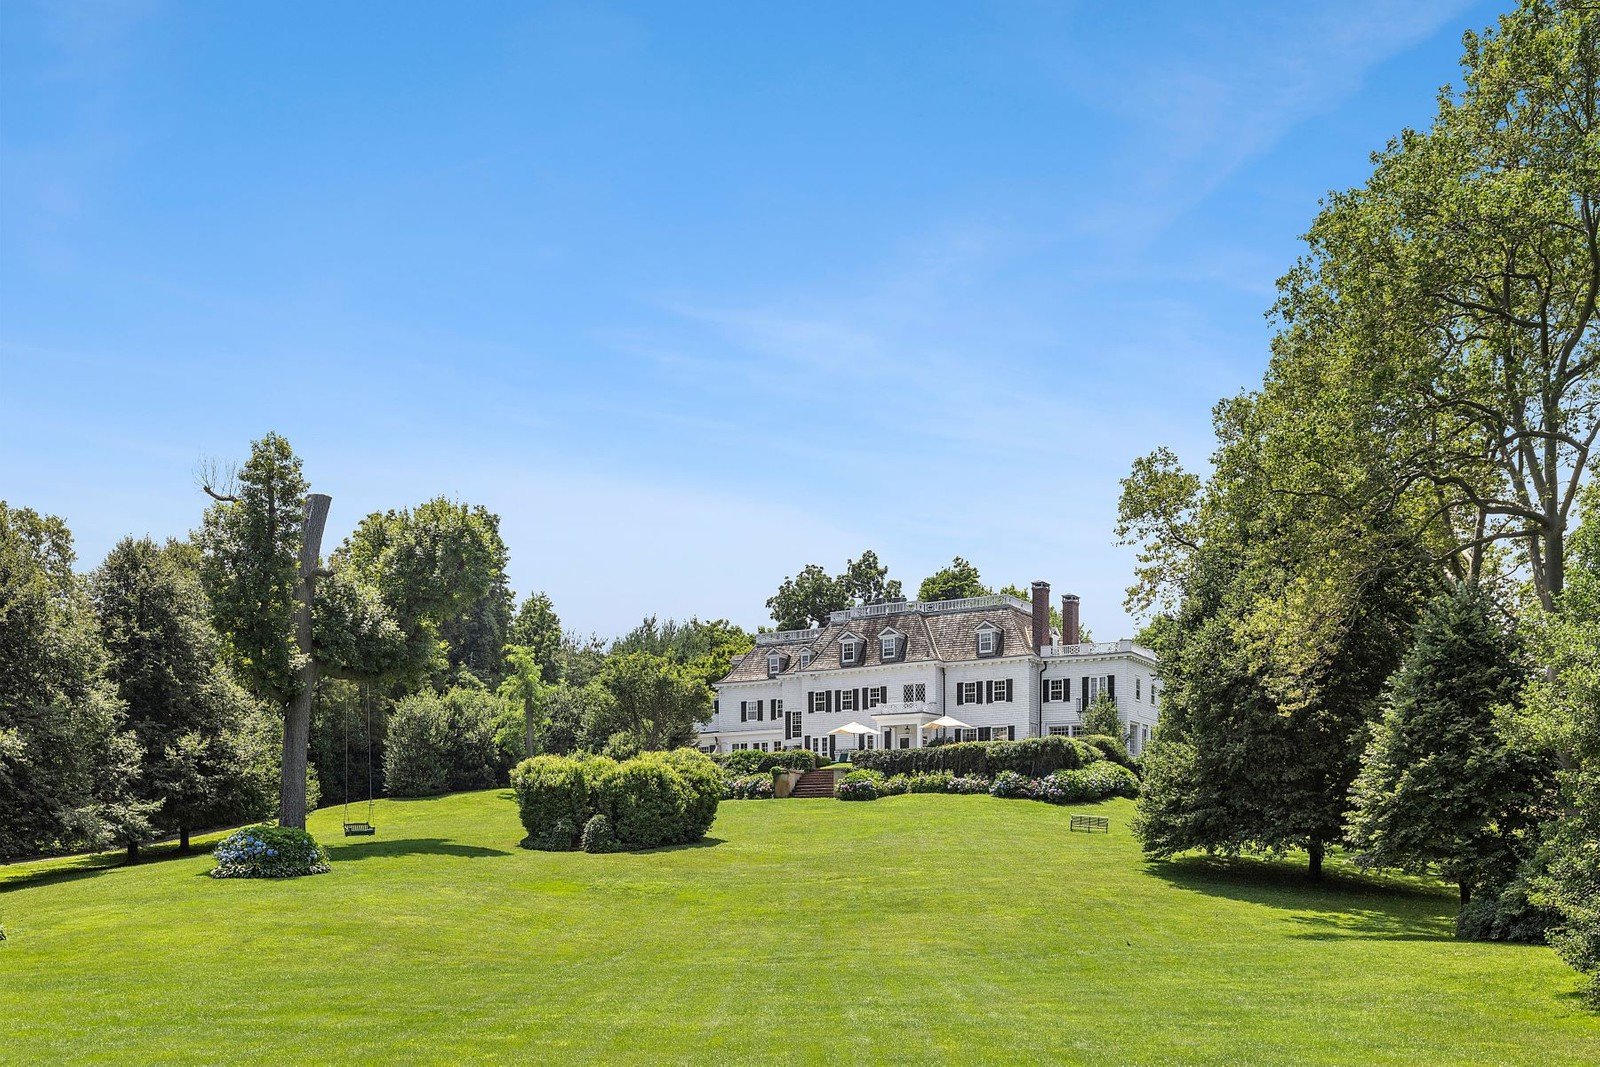 Francis York Daniel Gale Sothebys The Lindens Timeless Long Island Estate Once Home to the Famed Bootleggers, the Vanderbilts, and Rockstars 17.jpeg